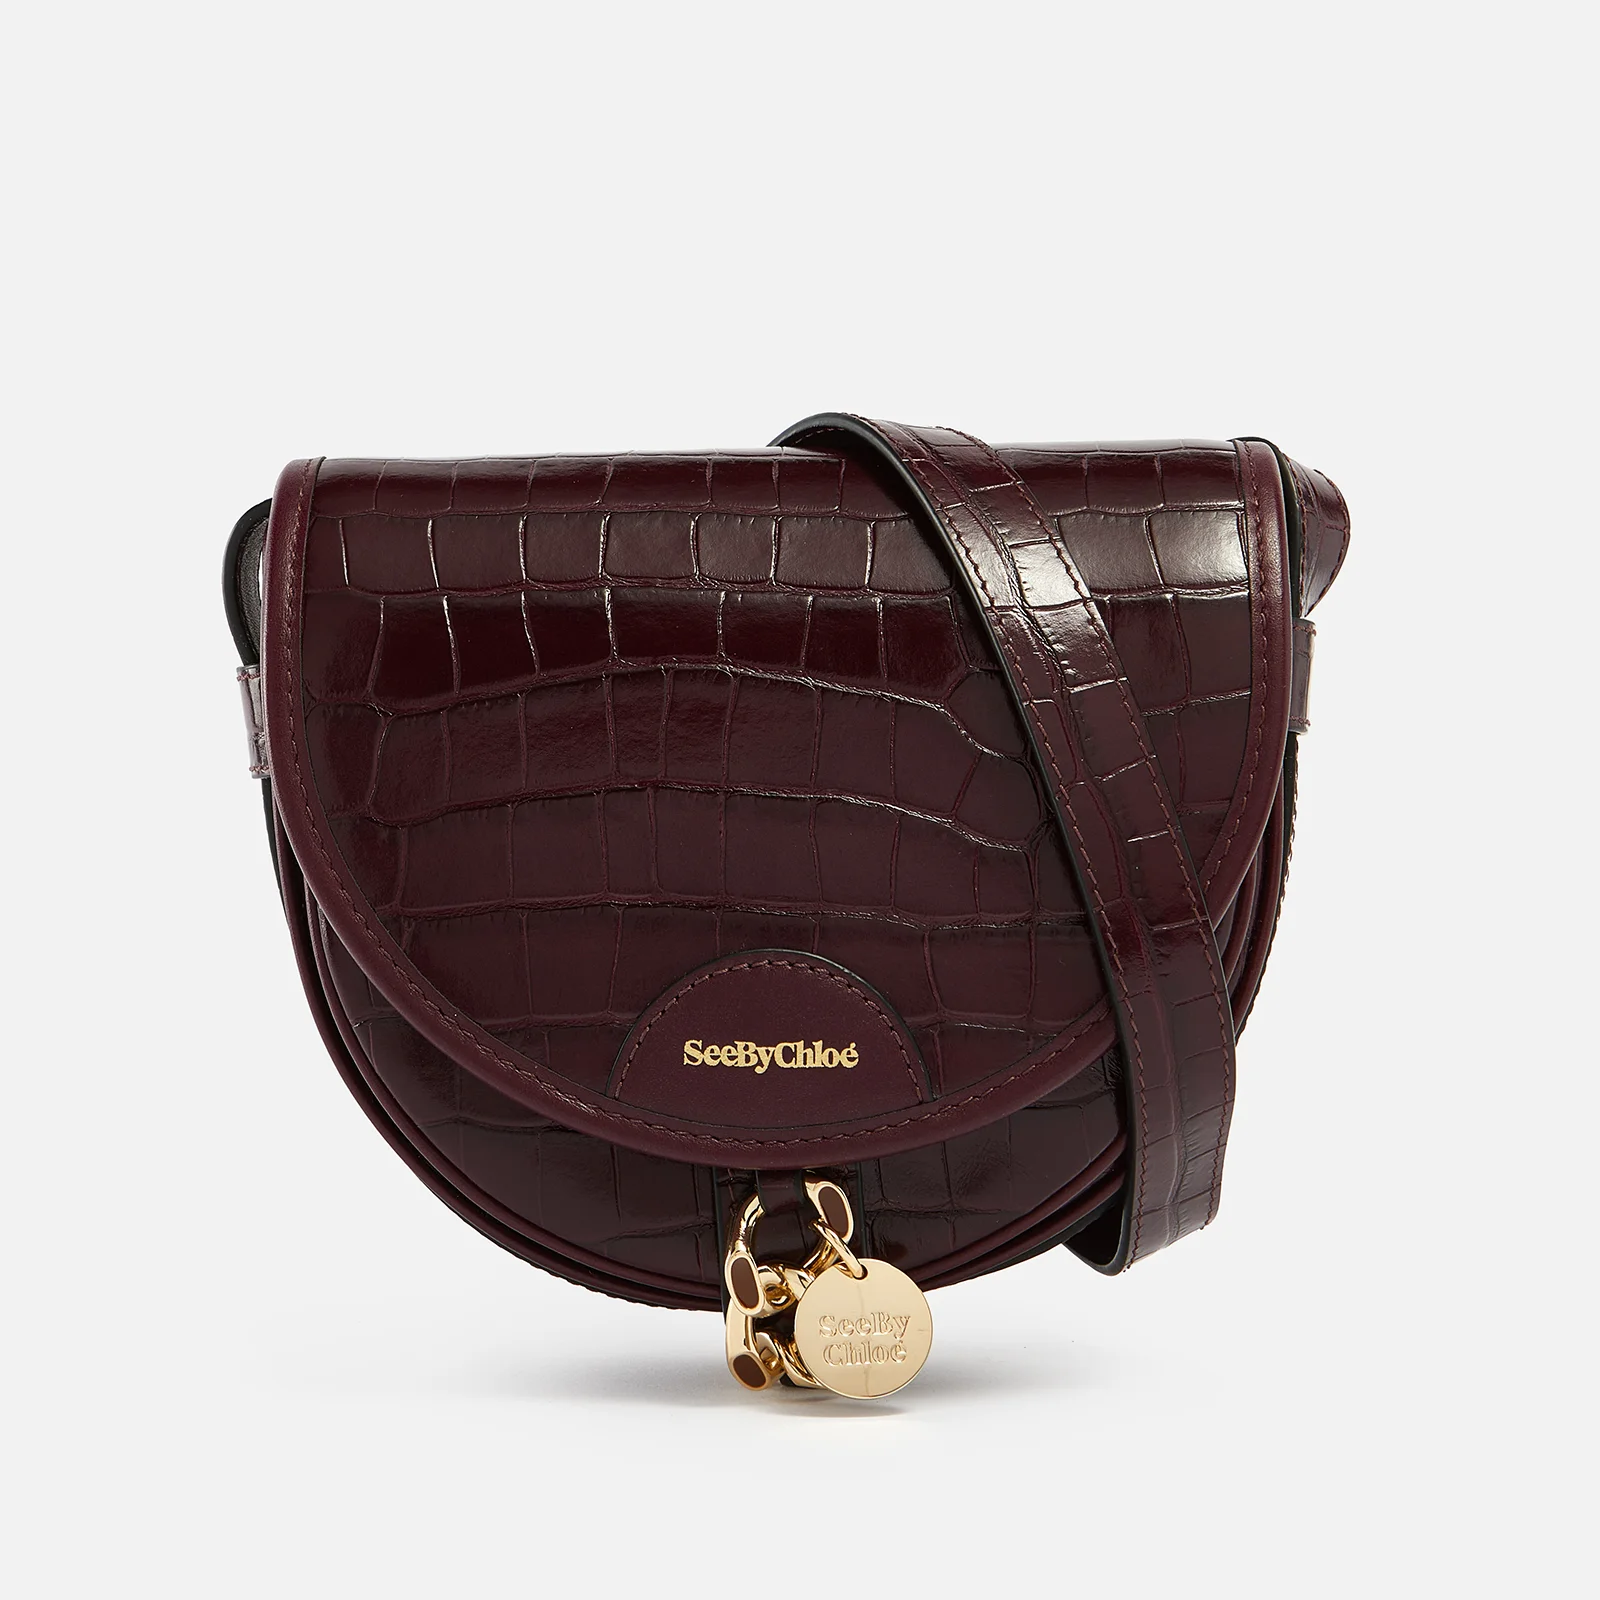 See By Chloé Mara Small Croc-Effect Leather Saddle Bag Image 1